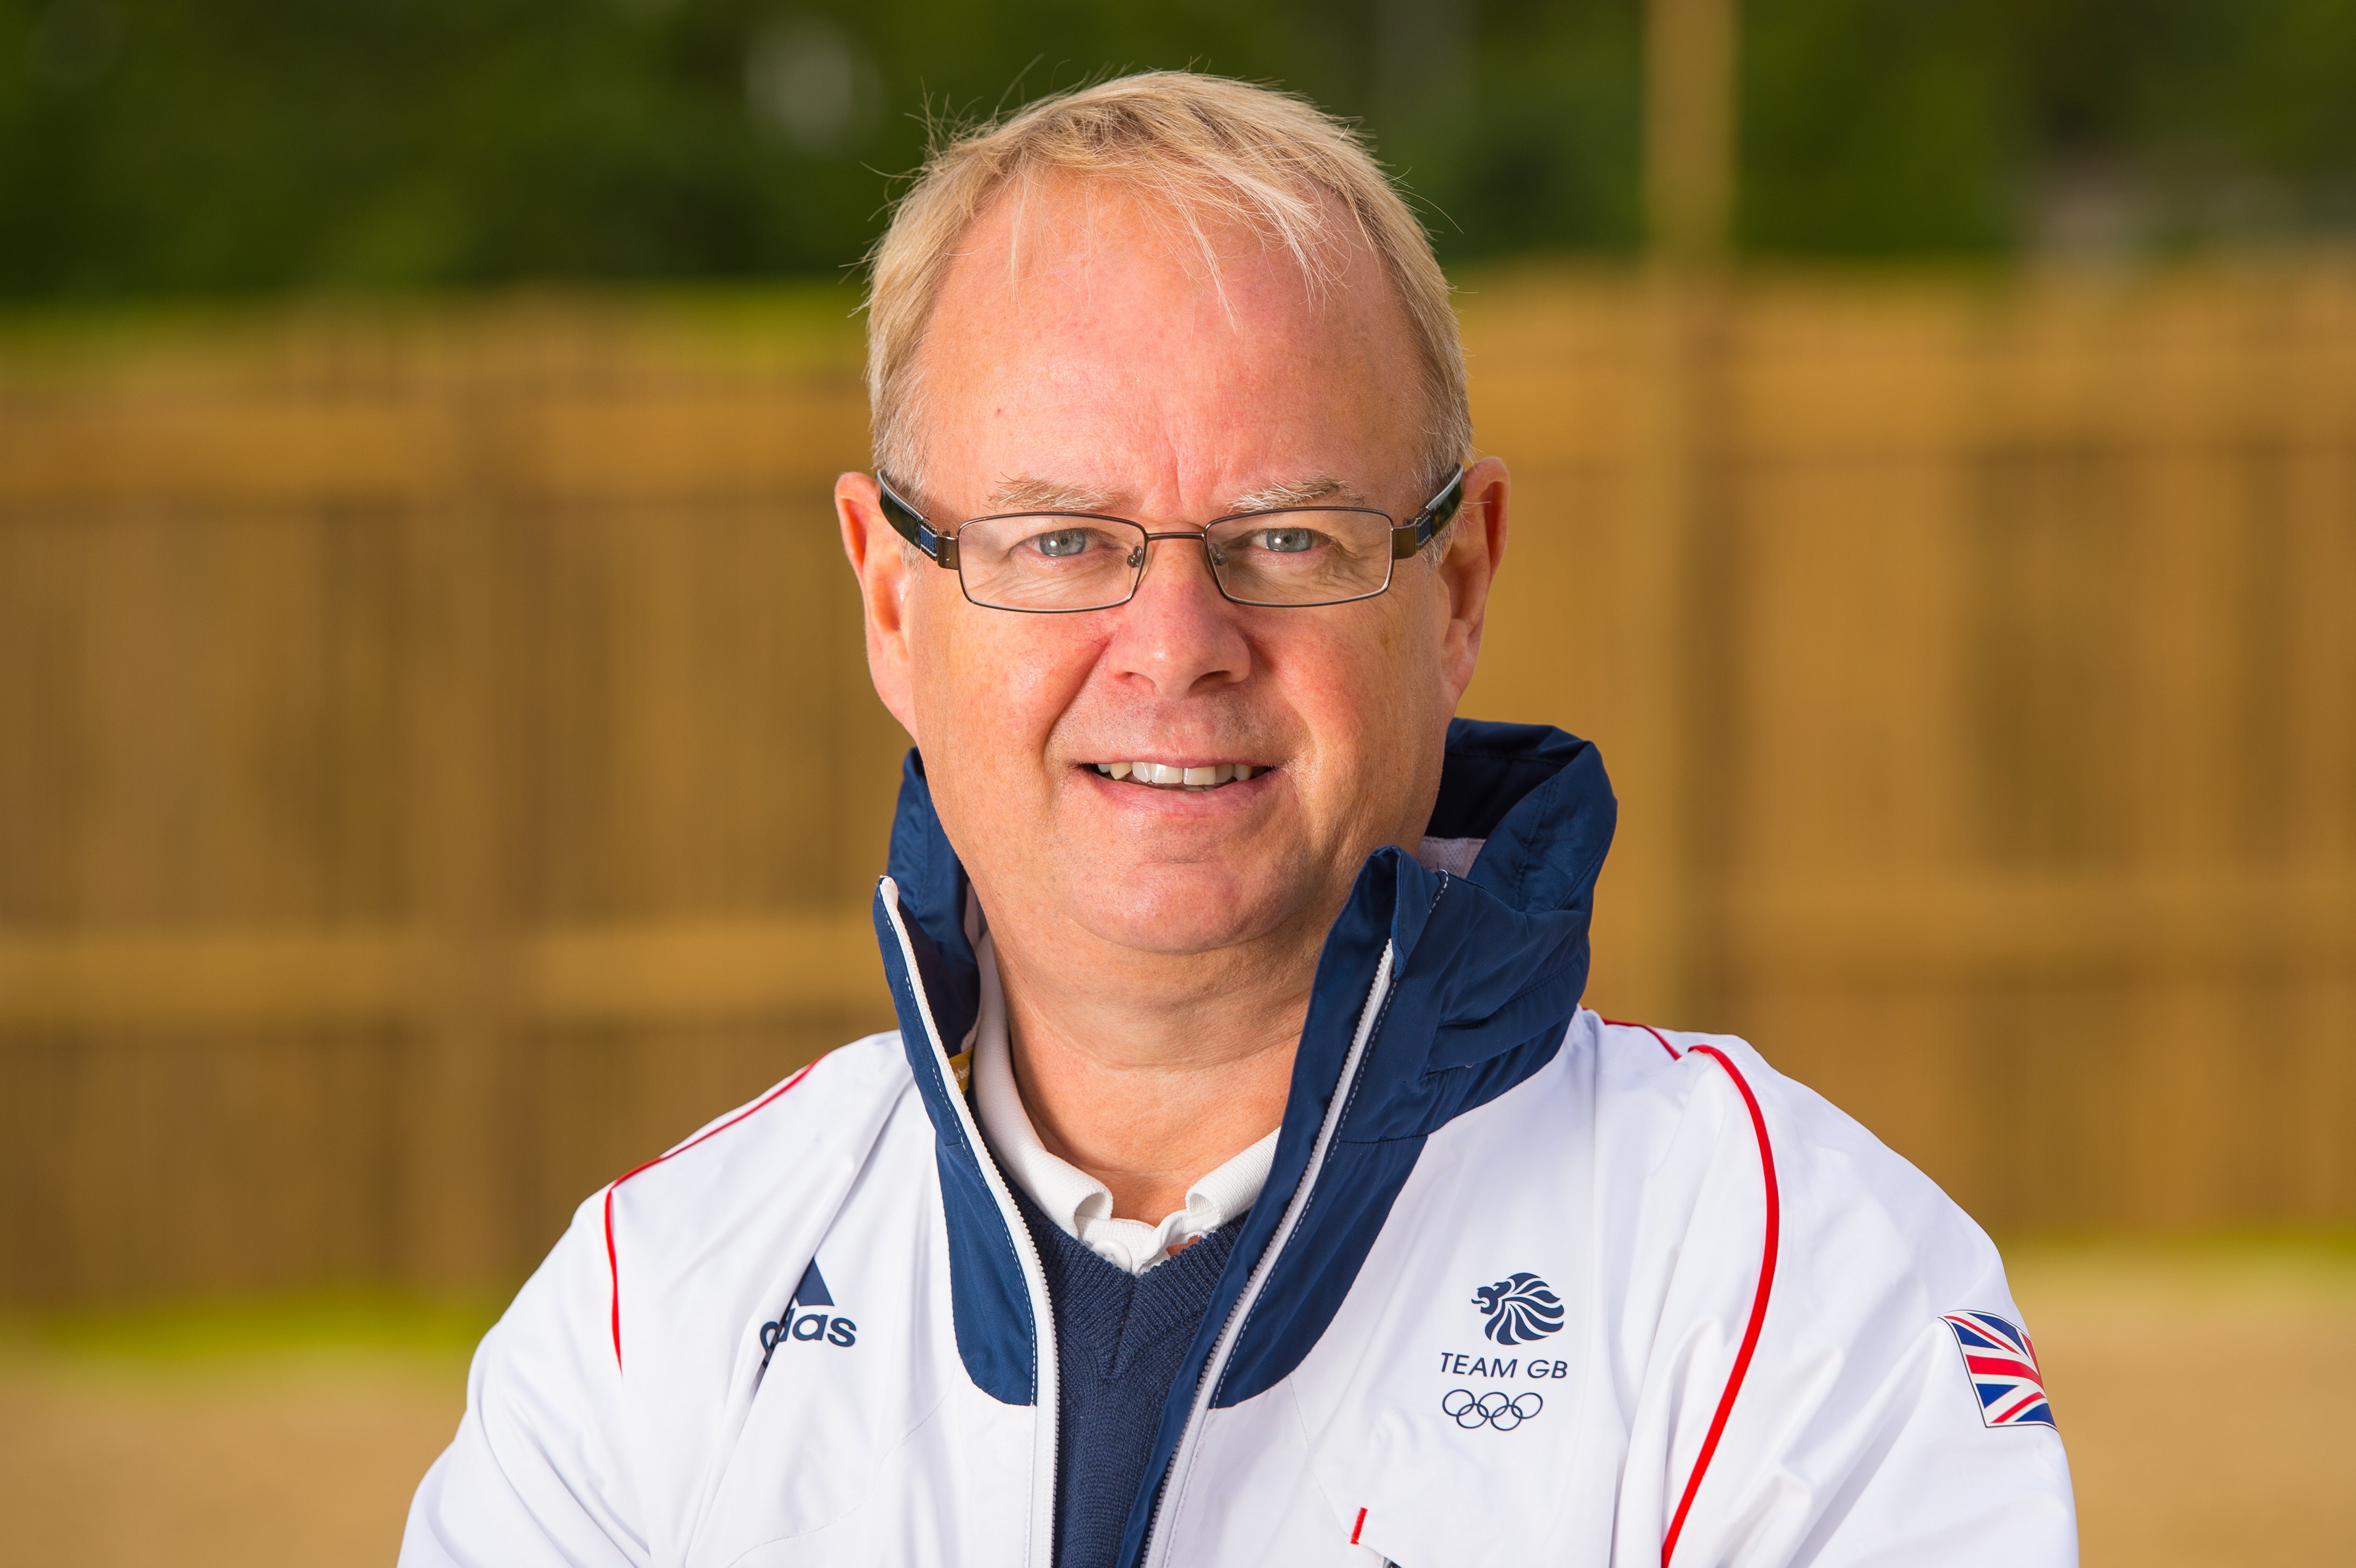 The Team GB Chef de Mission has urged athletes to take up the offer of vaccination